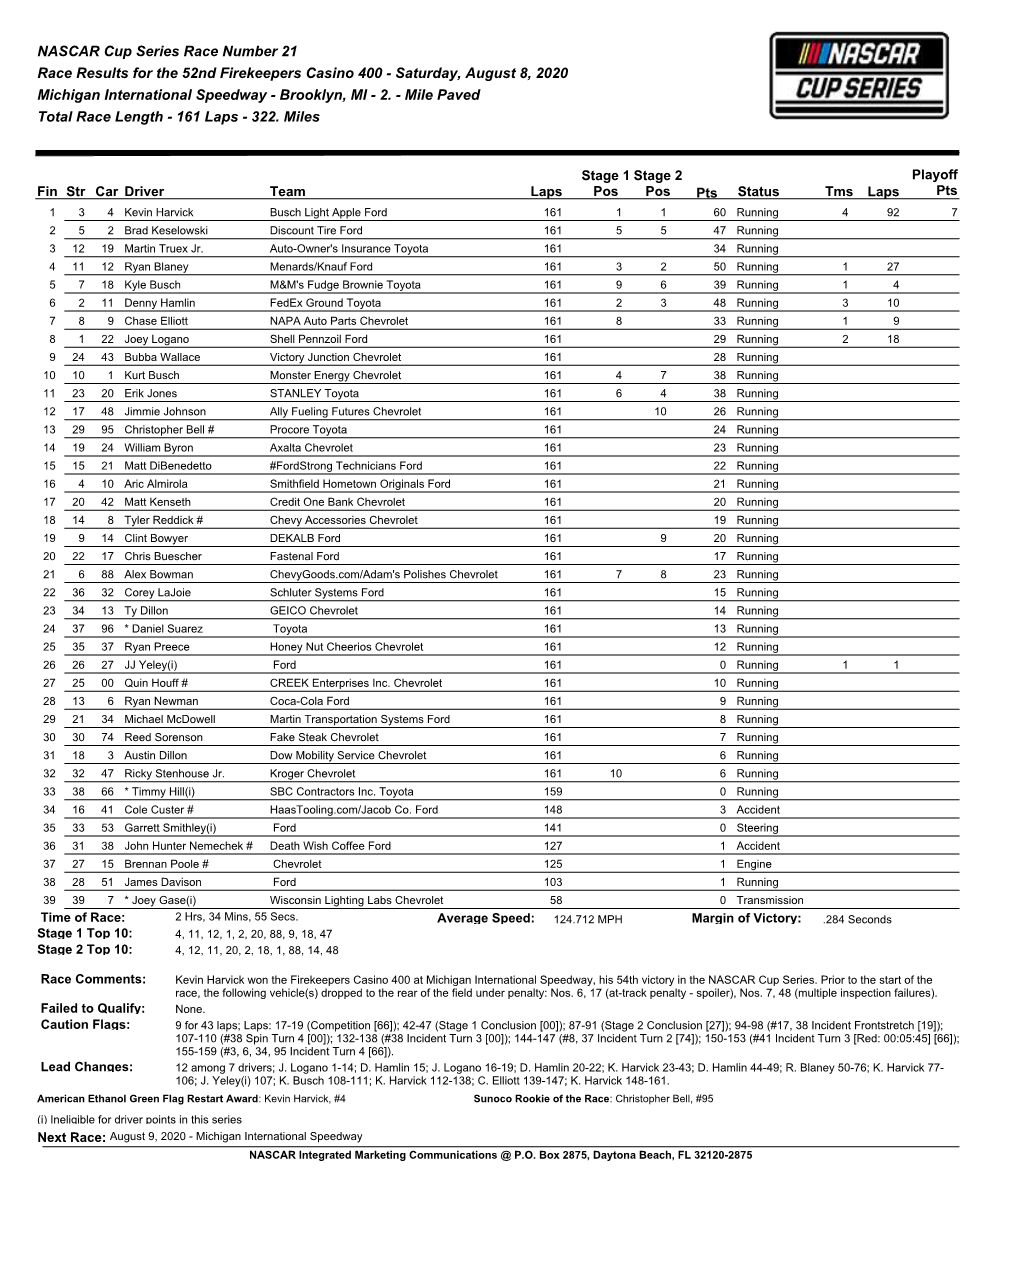 NASCAR Cup Series Race Number 21 Race Results for the 52Nd Firekeepers Casino 400 - Saturday, August 8, 2020 Michigan International Speedway - Brooklyn, MI - 2